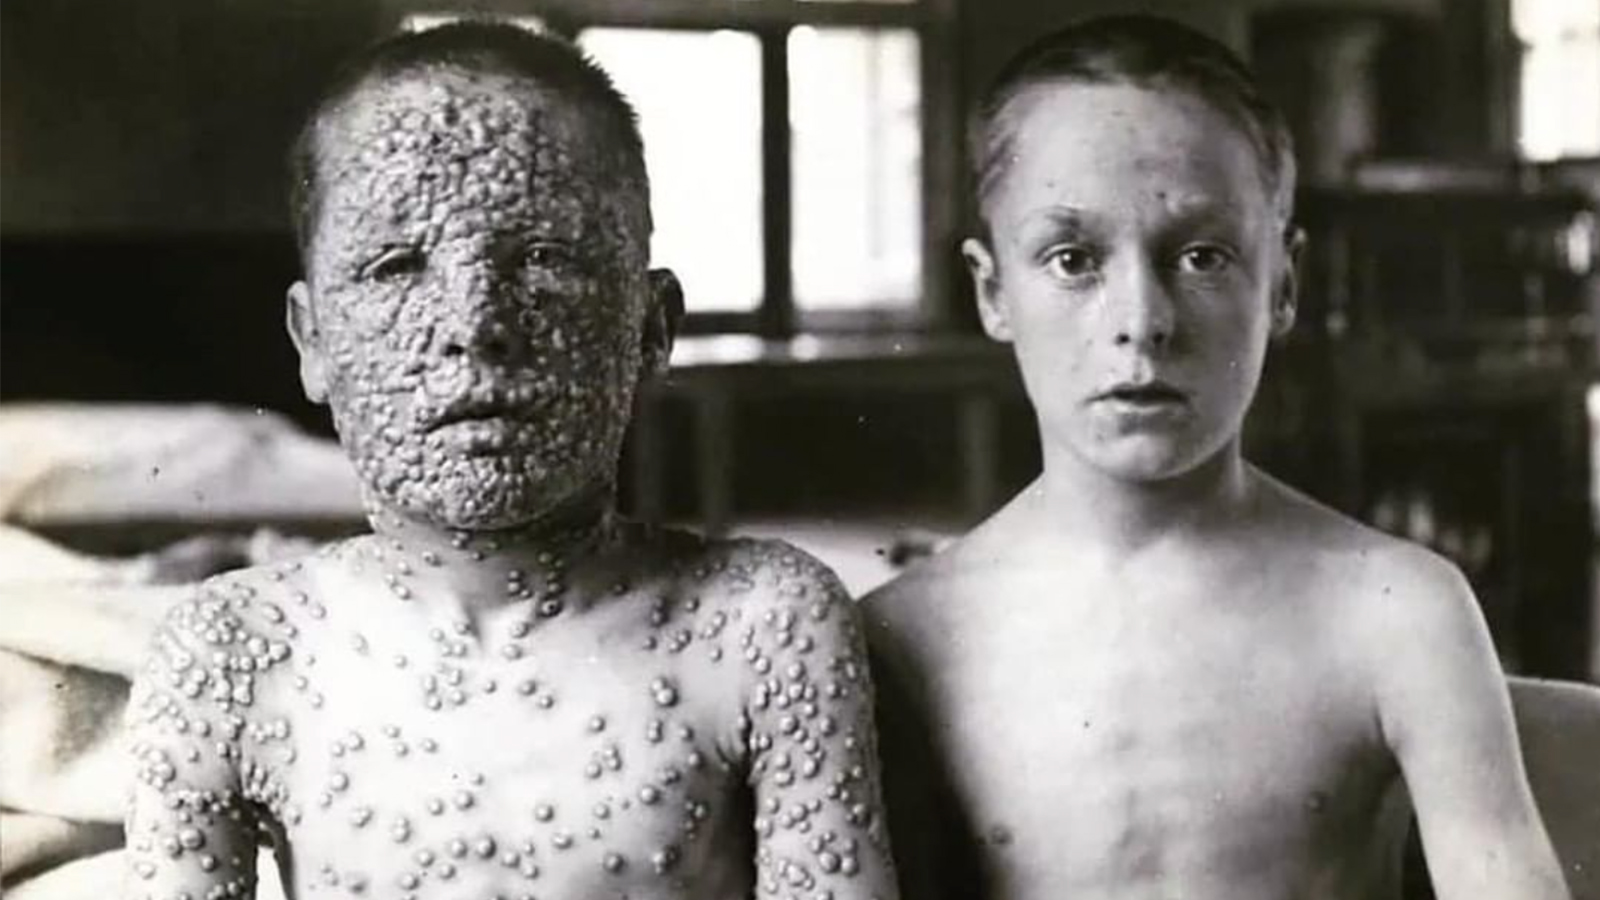 Shocking Smallpox Photo Shows The Benefits Of Vaccination